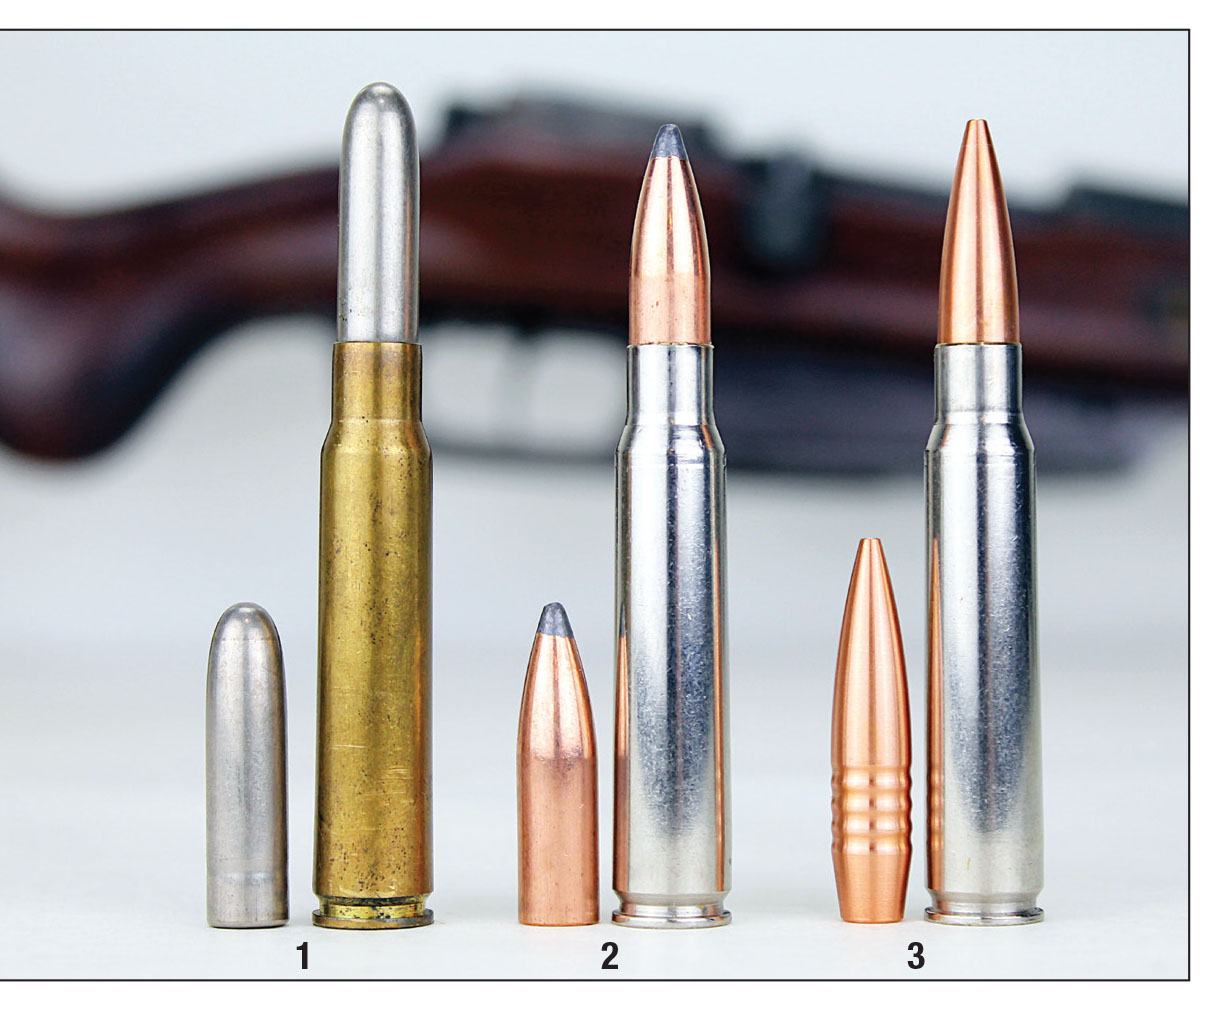 Shown here is an original 8x57J 227-grain roundnose bullet (1), with a 200-grain Buffalo Arms Co. bullet (2) and a 185-grain Hammer Hunter bullet (3).